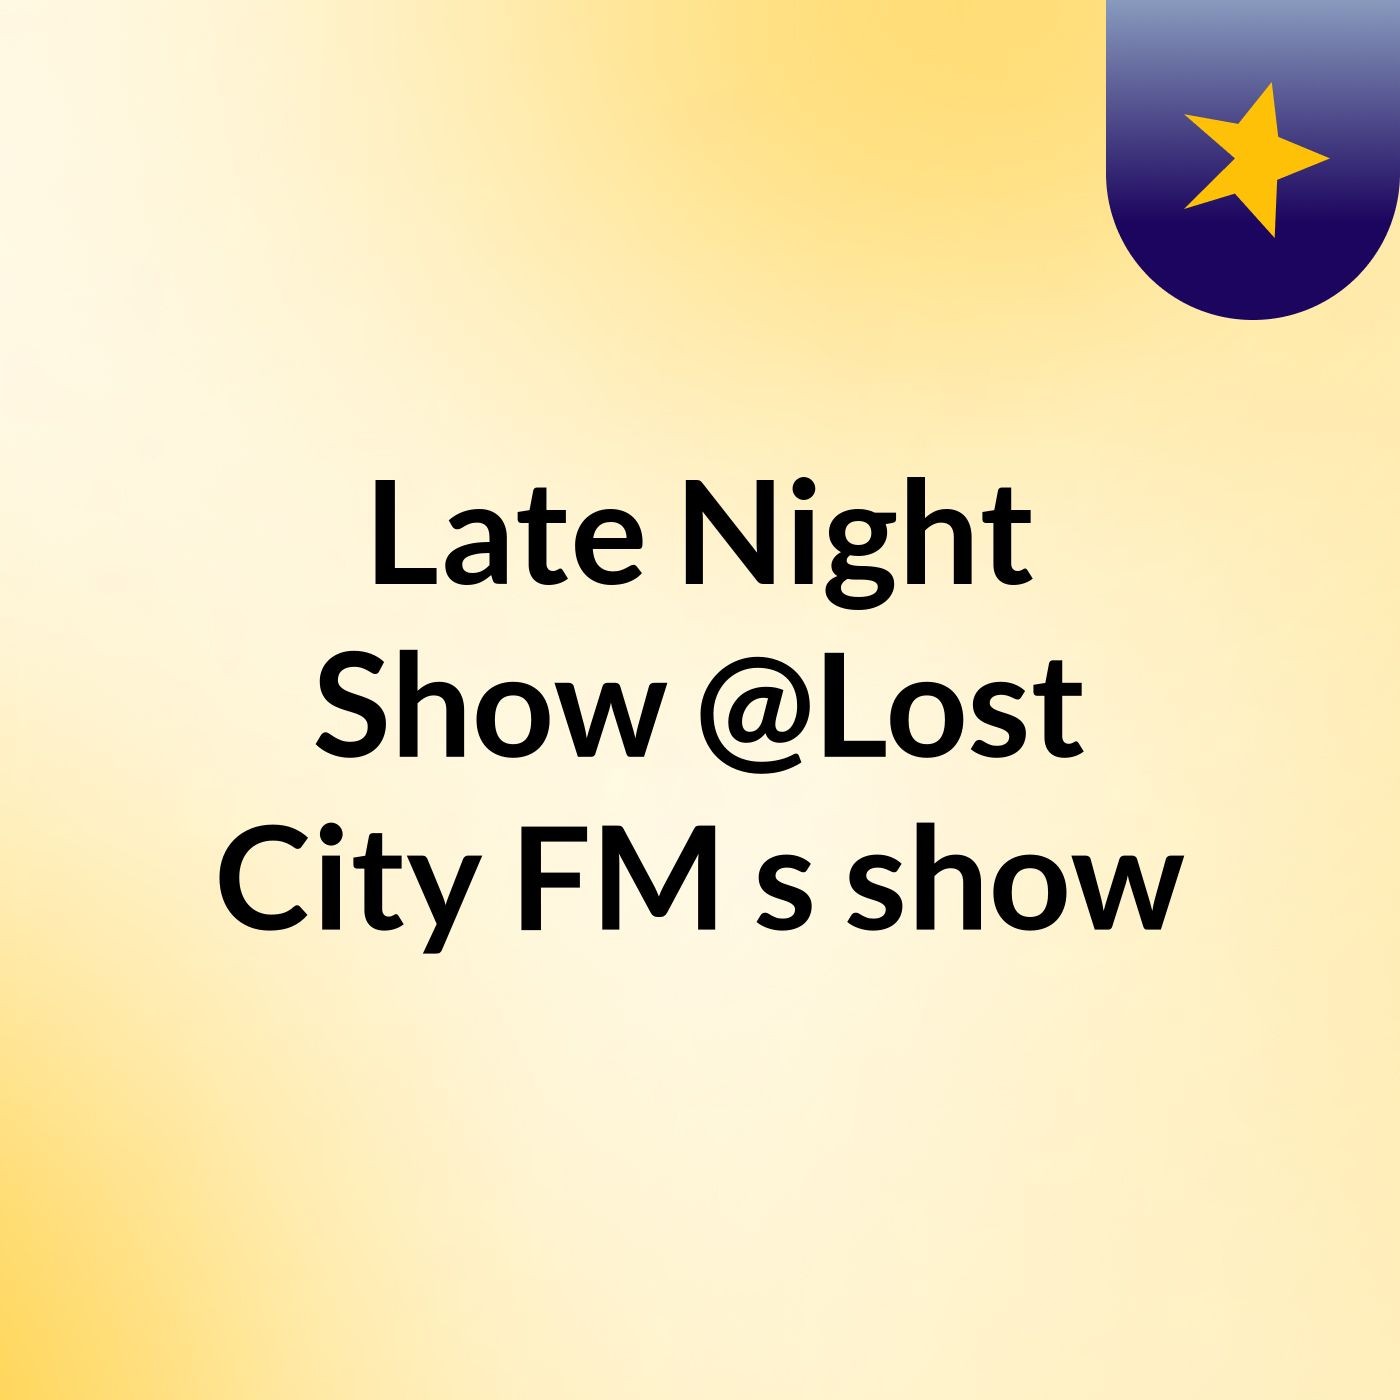 Late Night Show @Lost City FM's show